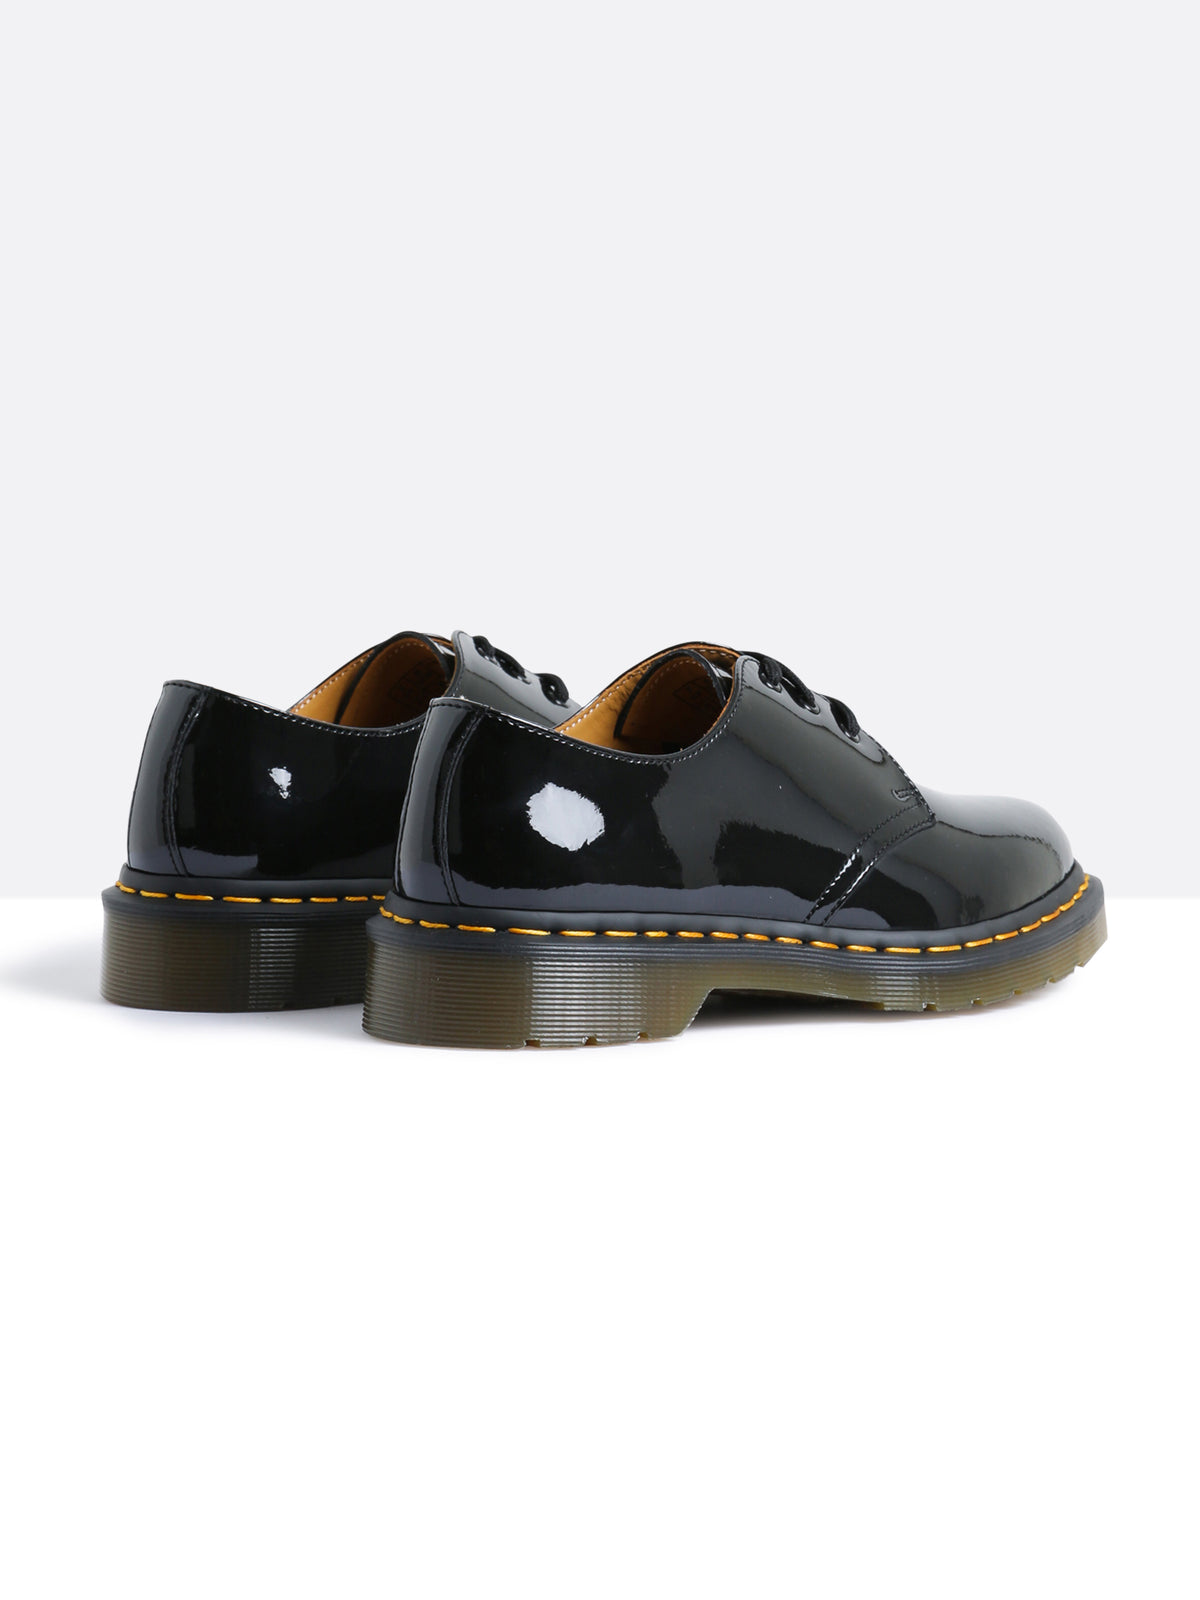 Womens 1461 3 Eye Shoes in Black Patent